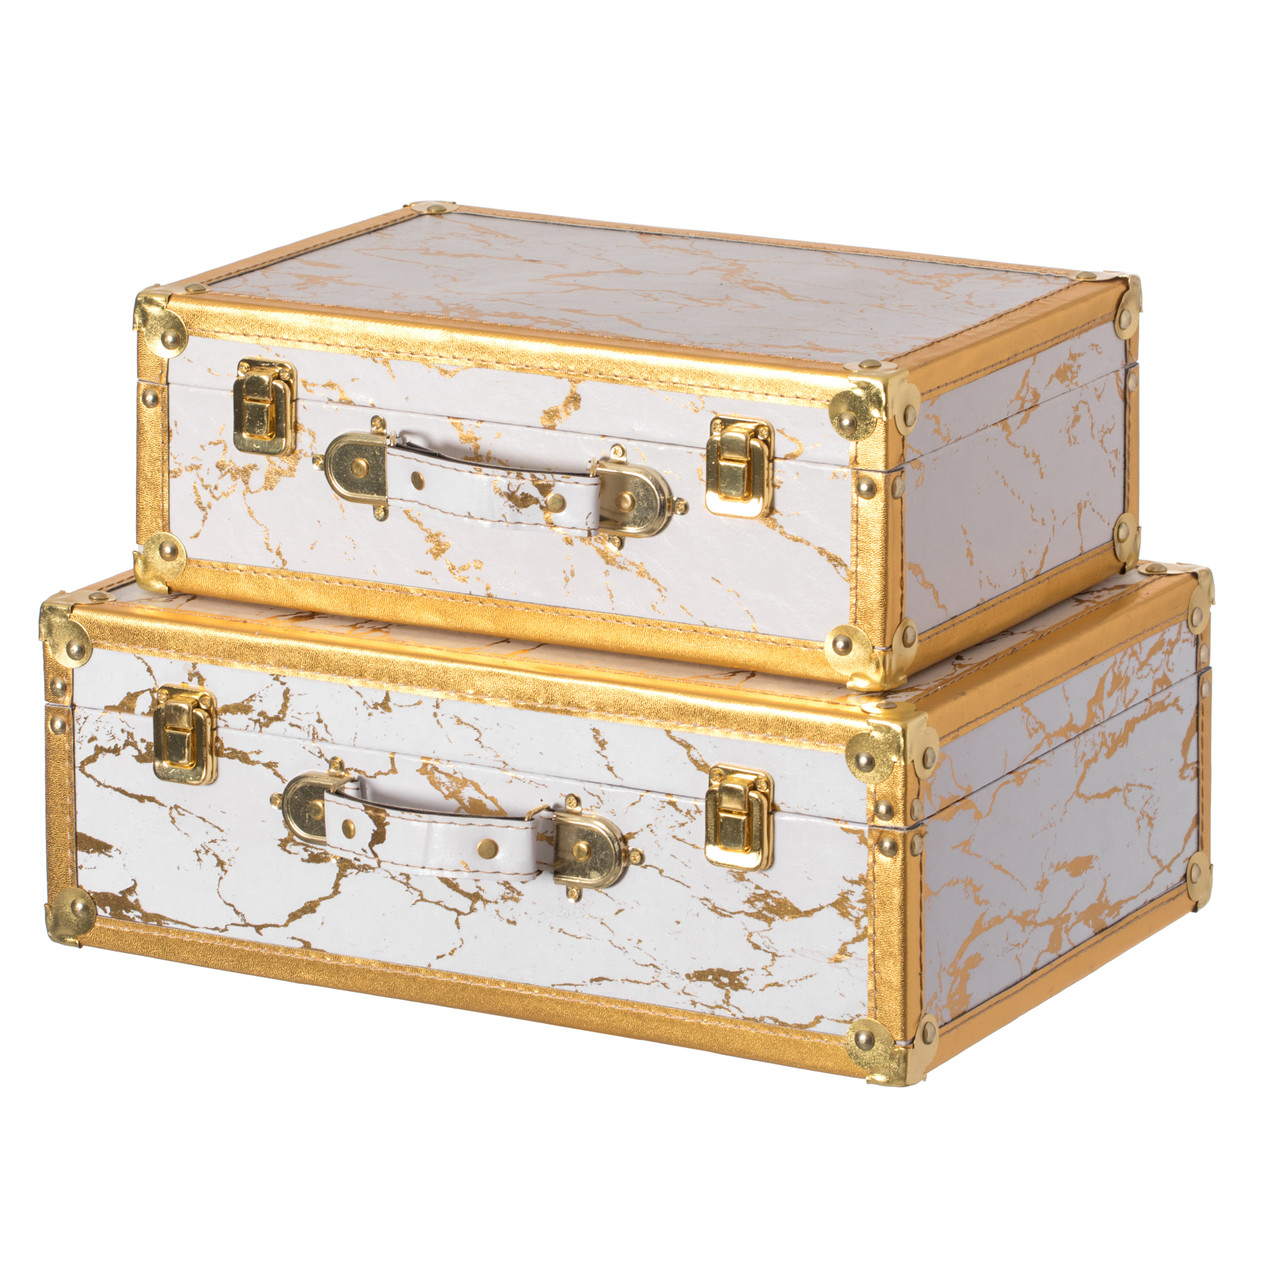 Coffee table Louis Vuitton trunk - Tables - Items by category - European  ANTIQUES & DECORATIVE